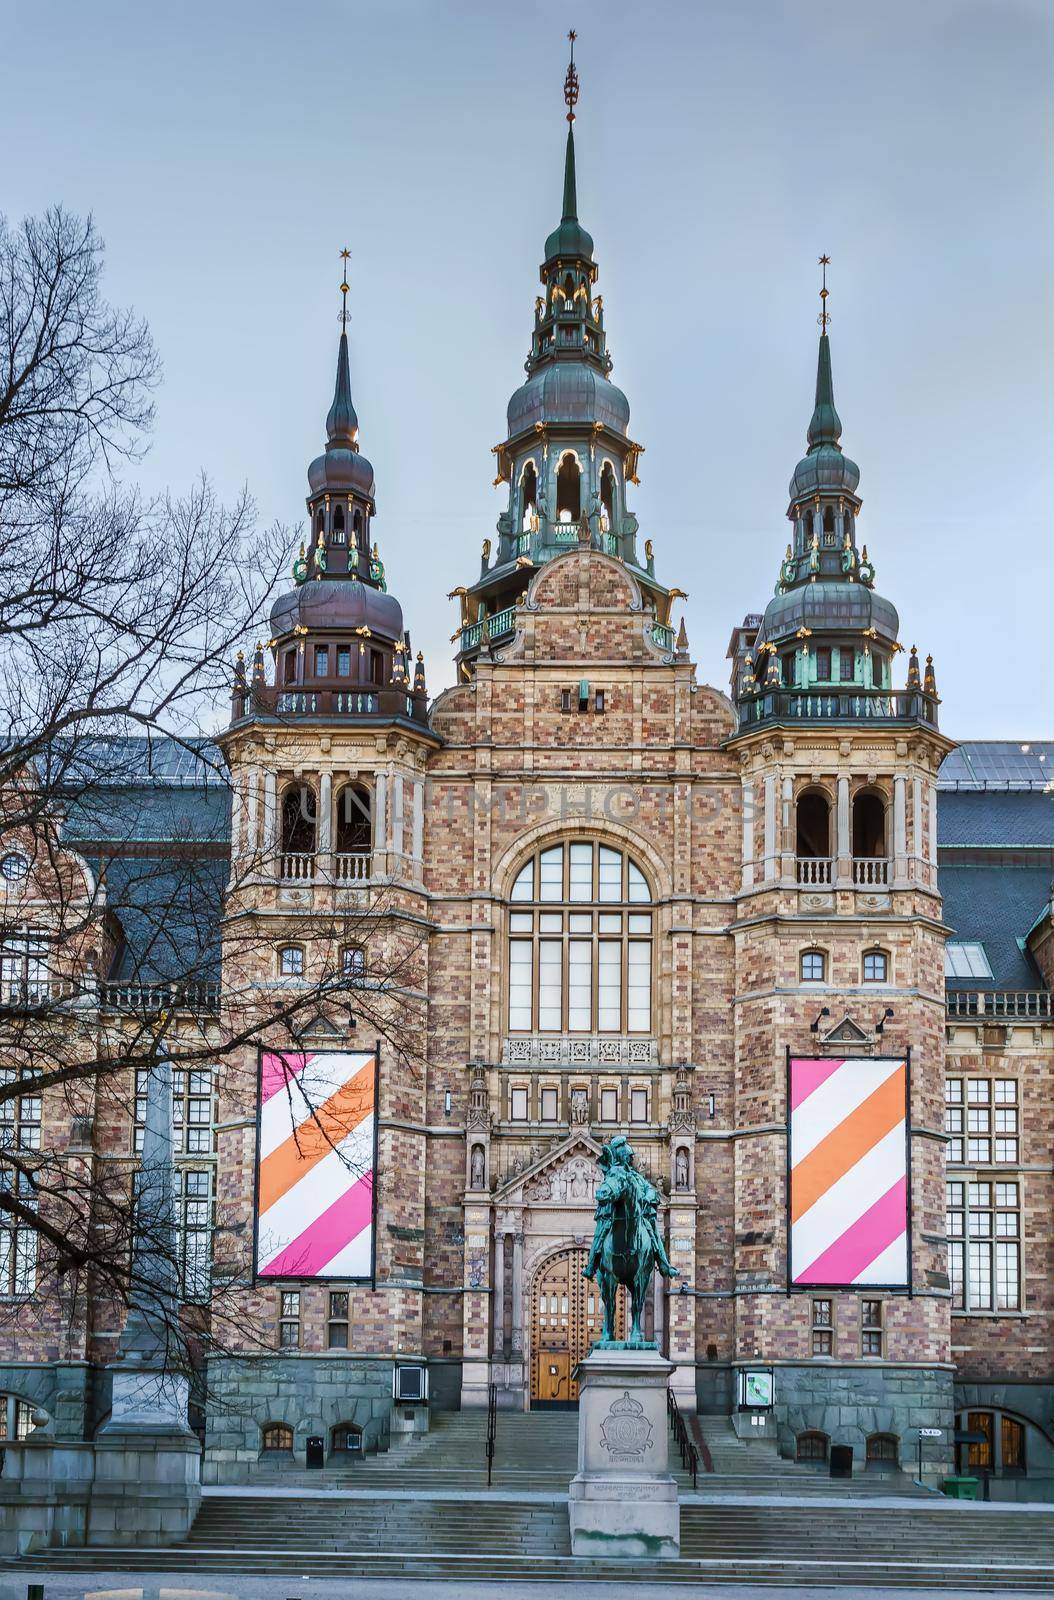  Nordic Museum is a museum located on Djurgarden island in central Stockholm, Sweden